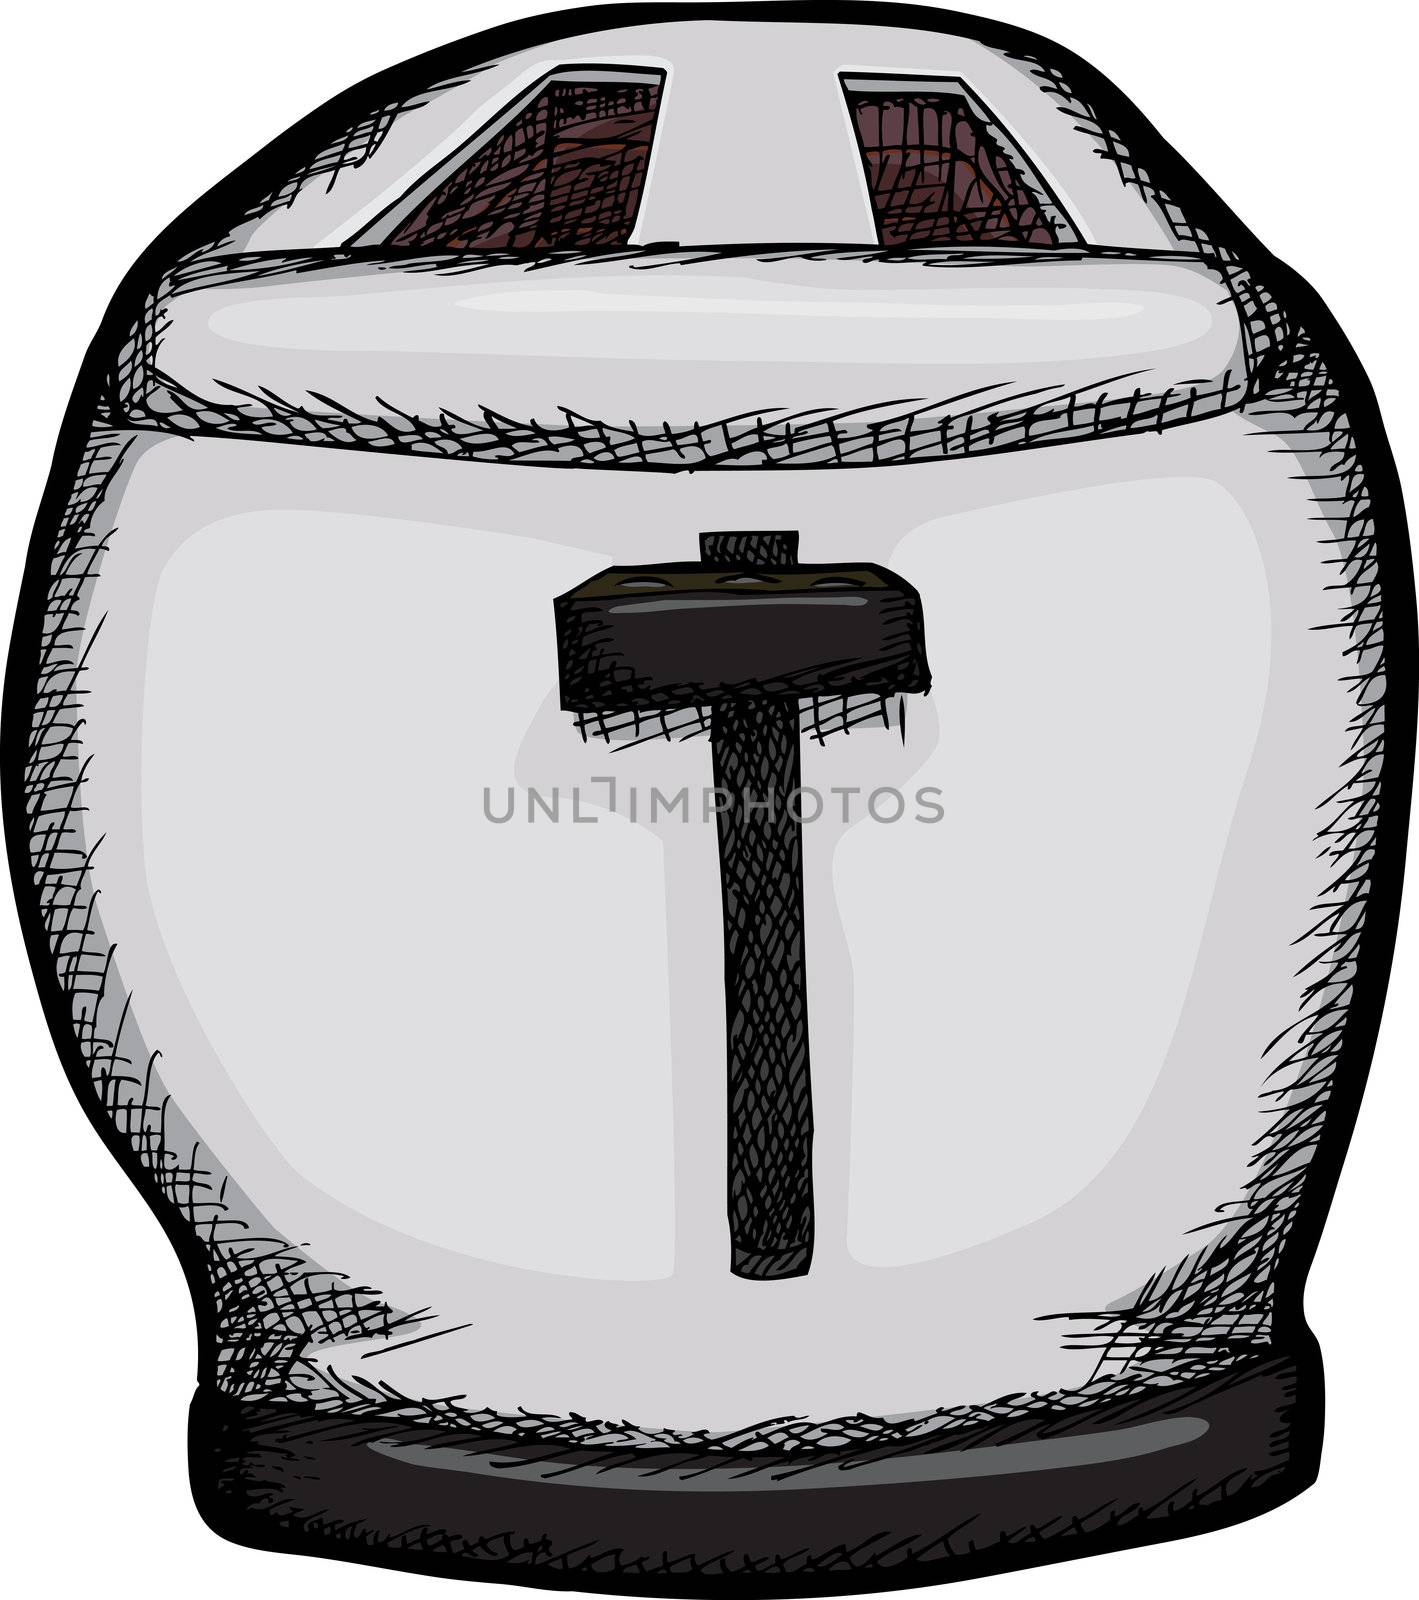 Isolated drawing of fat 2-slice toaster over white background